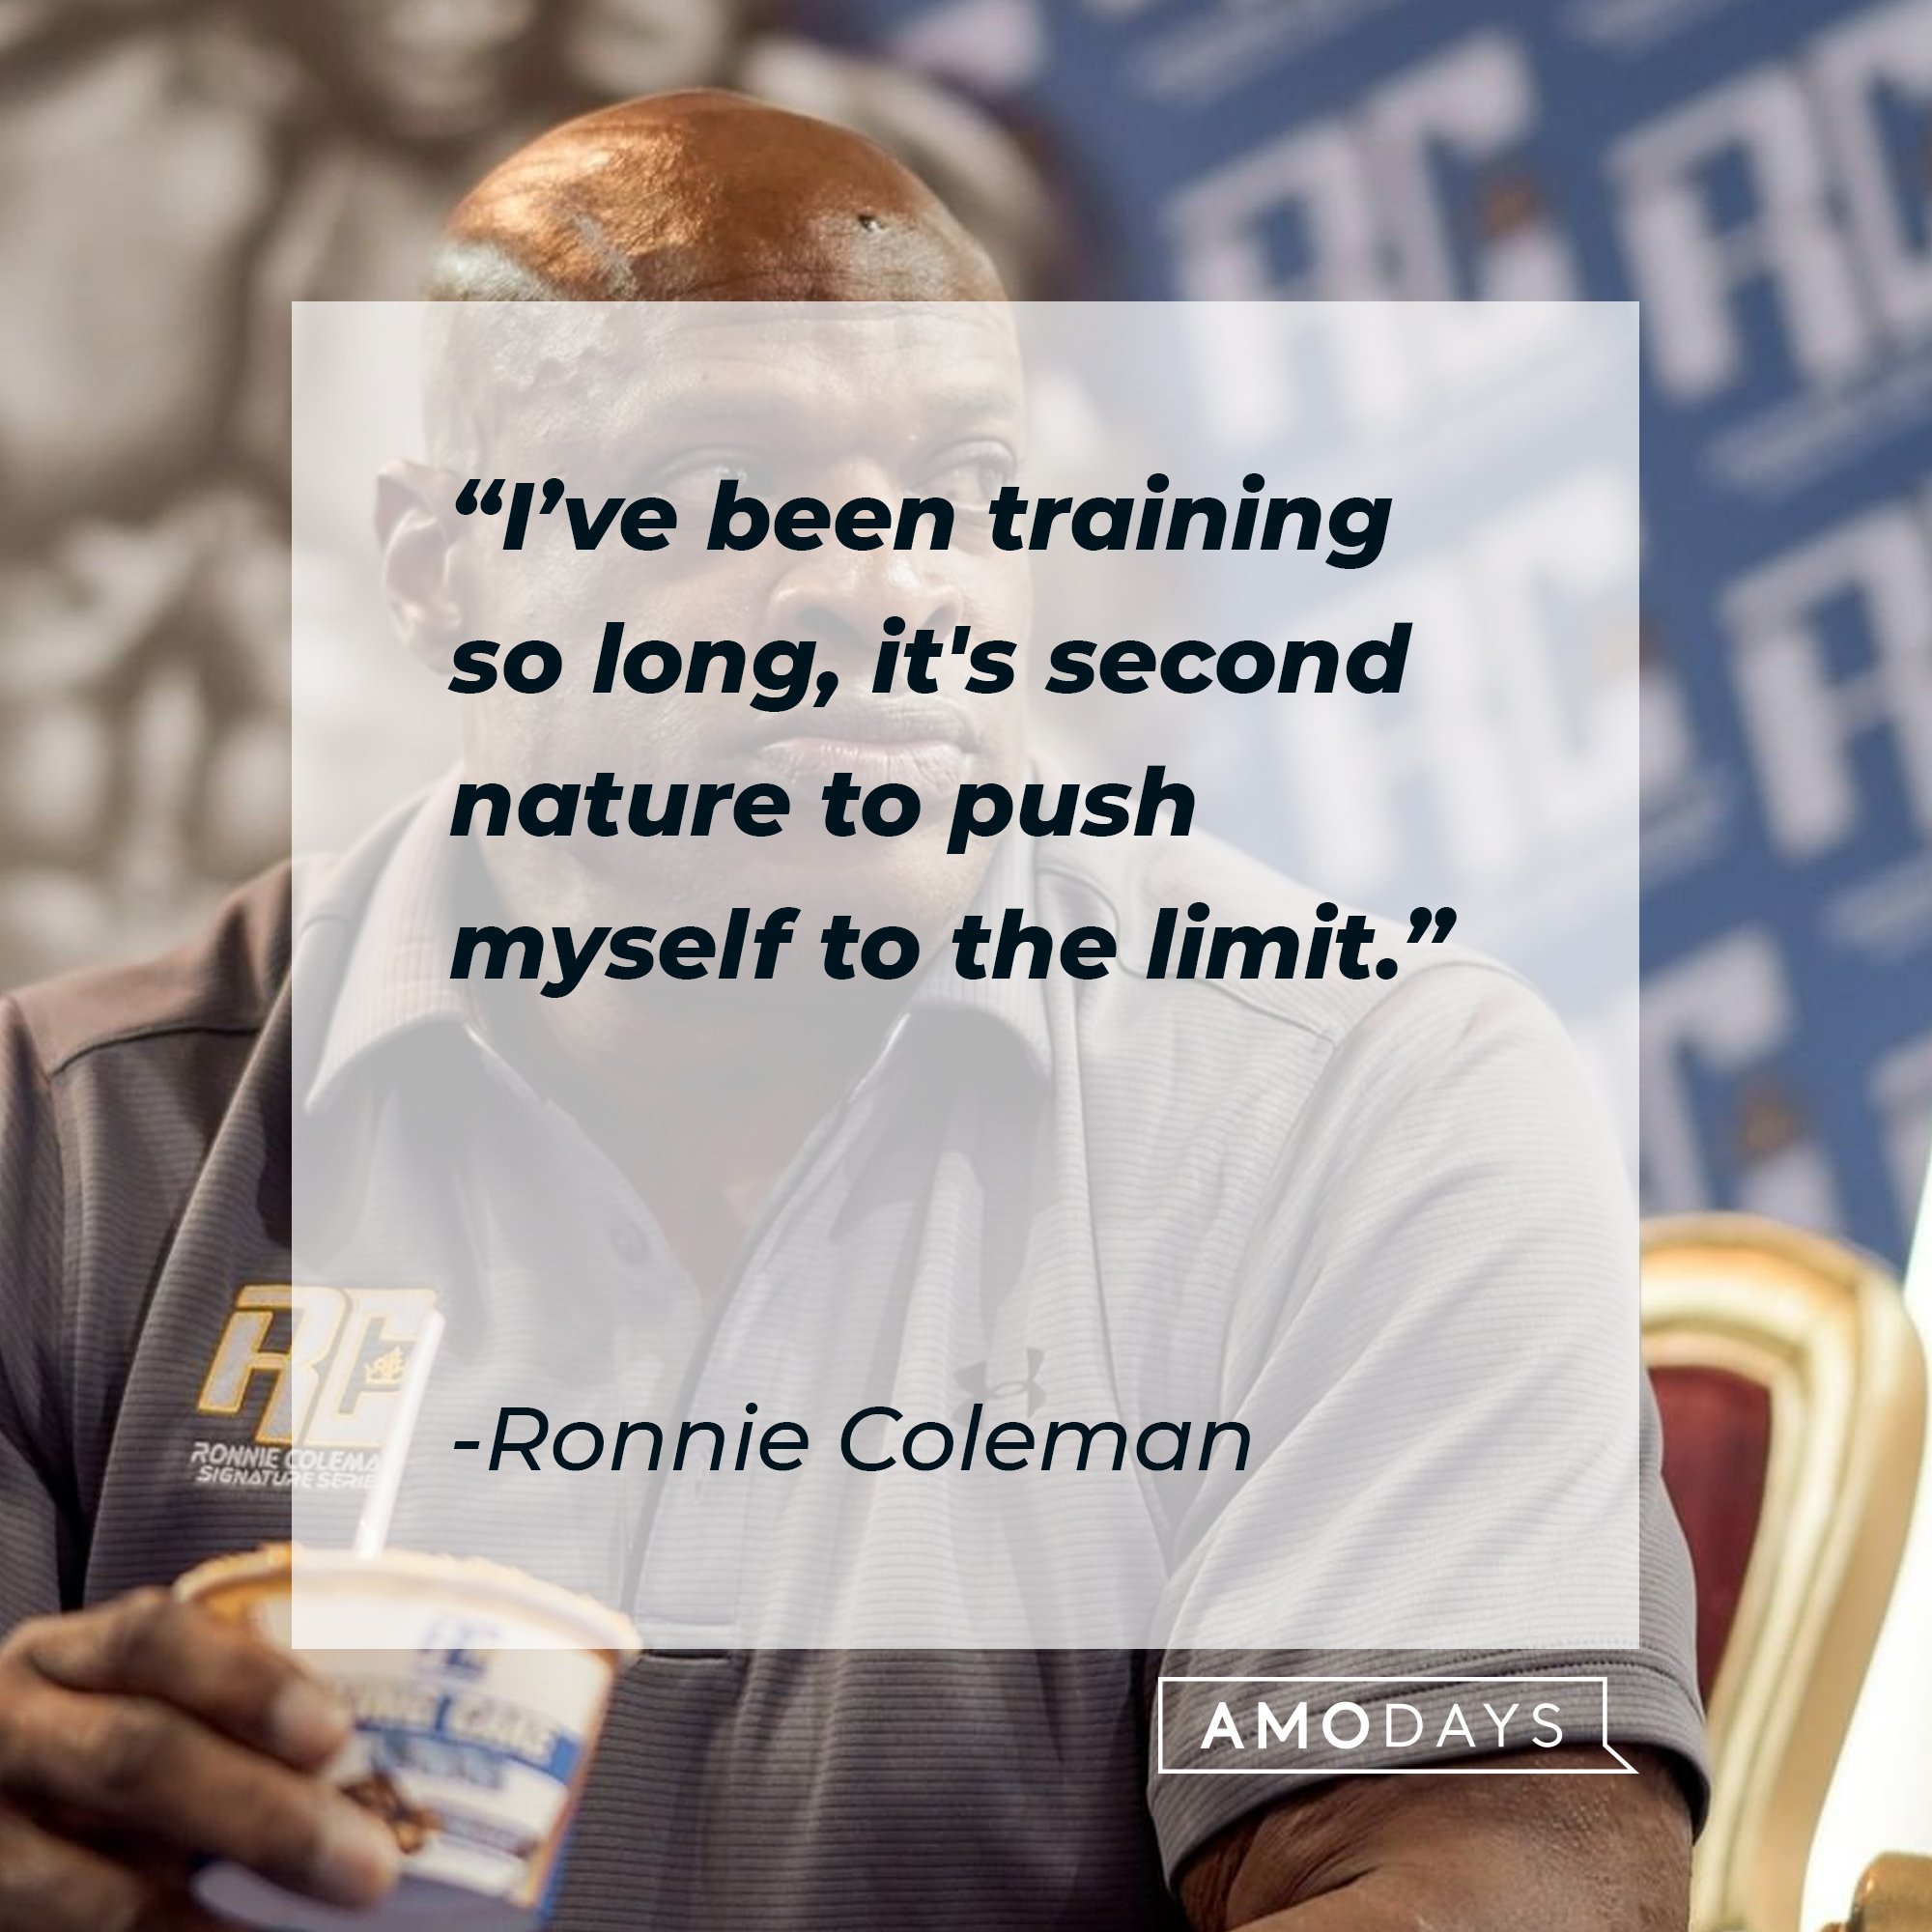  Ronnie Coleman’s quote: "I’ve been training so long, it's second nature to push myself to the limit." | Image: AmoDays